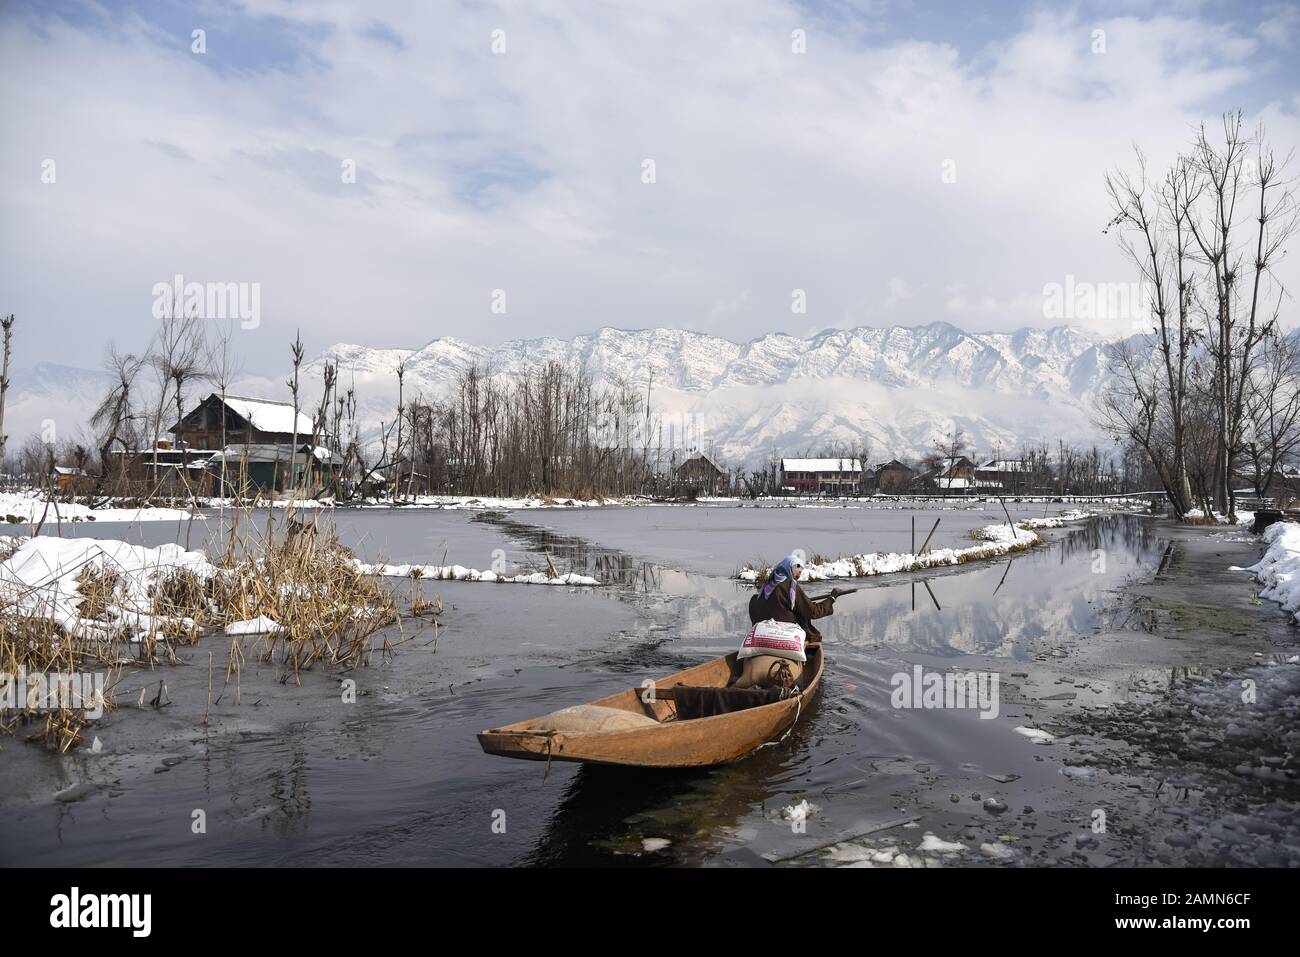 A Kashmiri woman rows her boat on Dal Lake after fresh snowfall in Srinagar.Due to heavy snowfall in the last 48 hours, there have been multiple avalanches in which at least 4 Indian army soldiers and 5 civilians Killed in the Indian administered Kashmir. Stock Photo